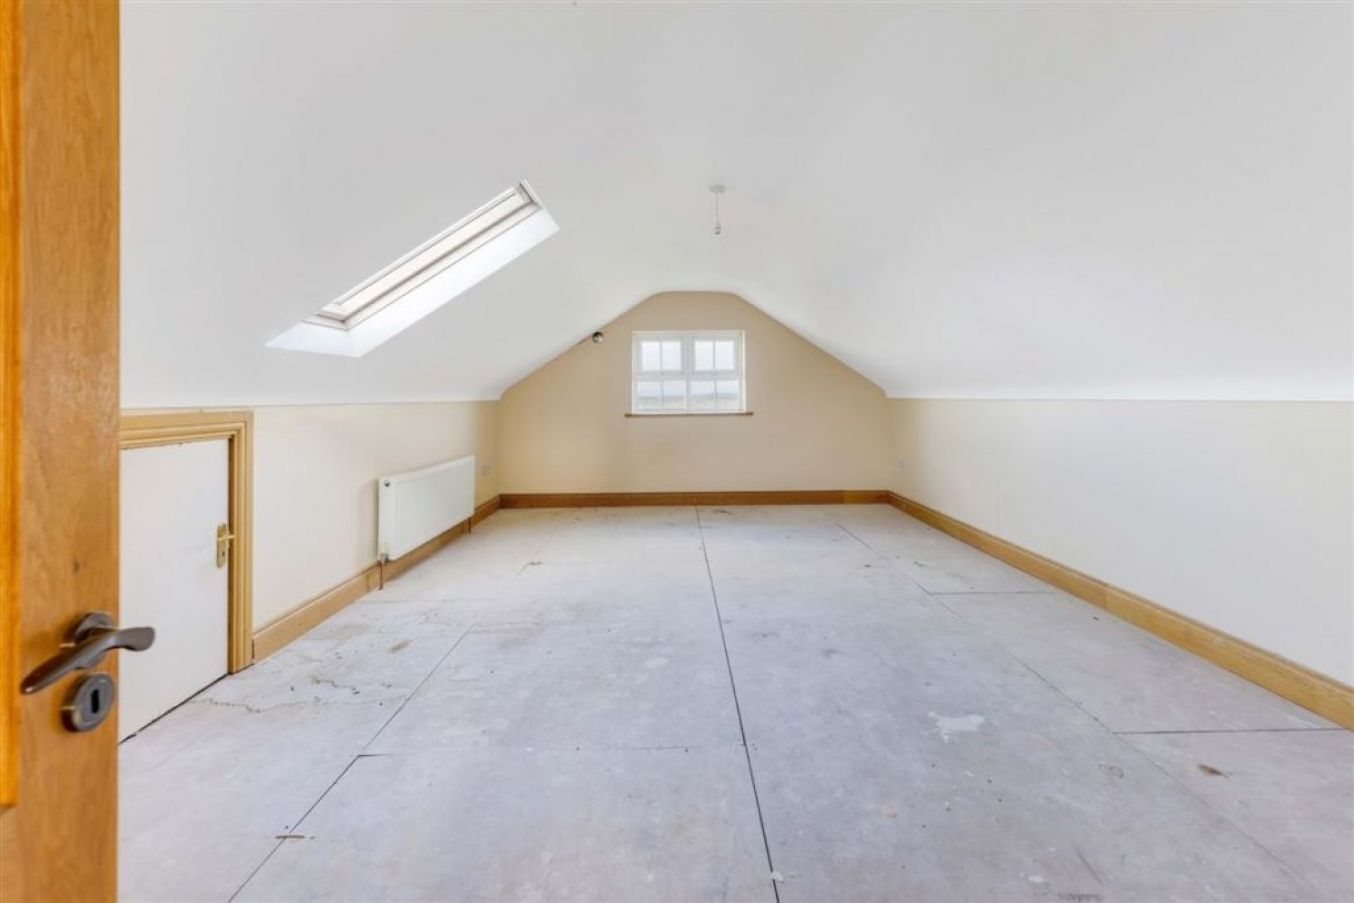 Converted Attic Space With Eave Access